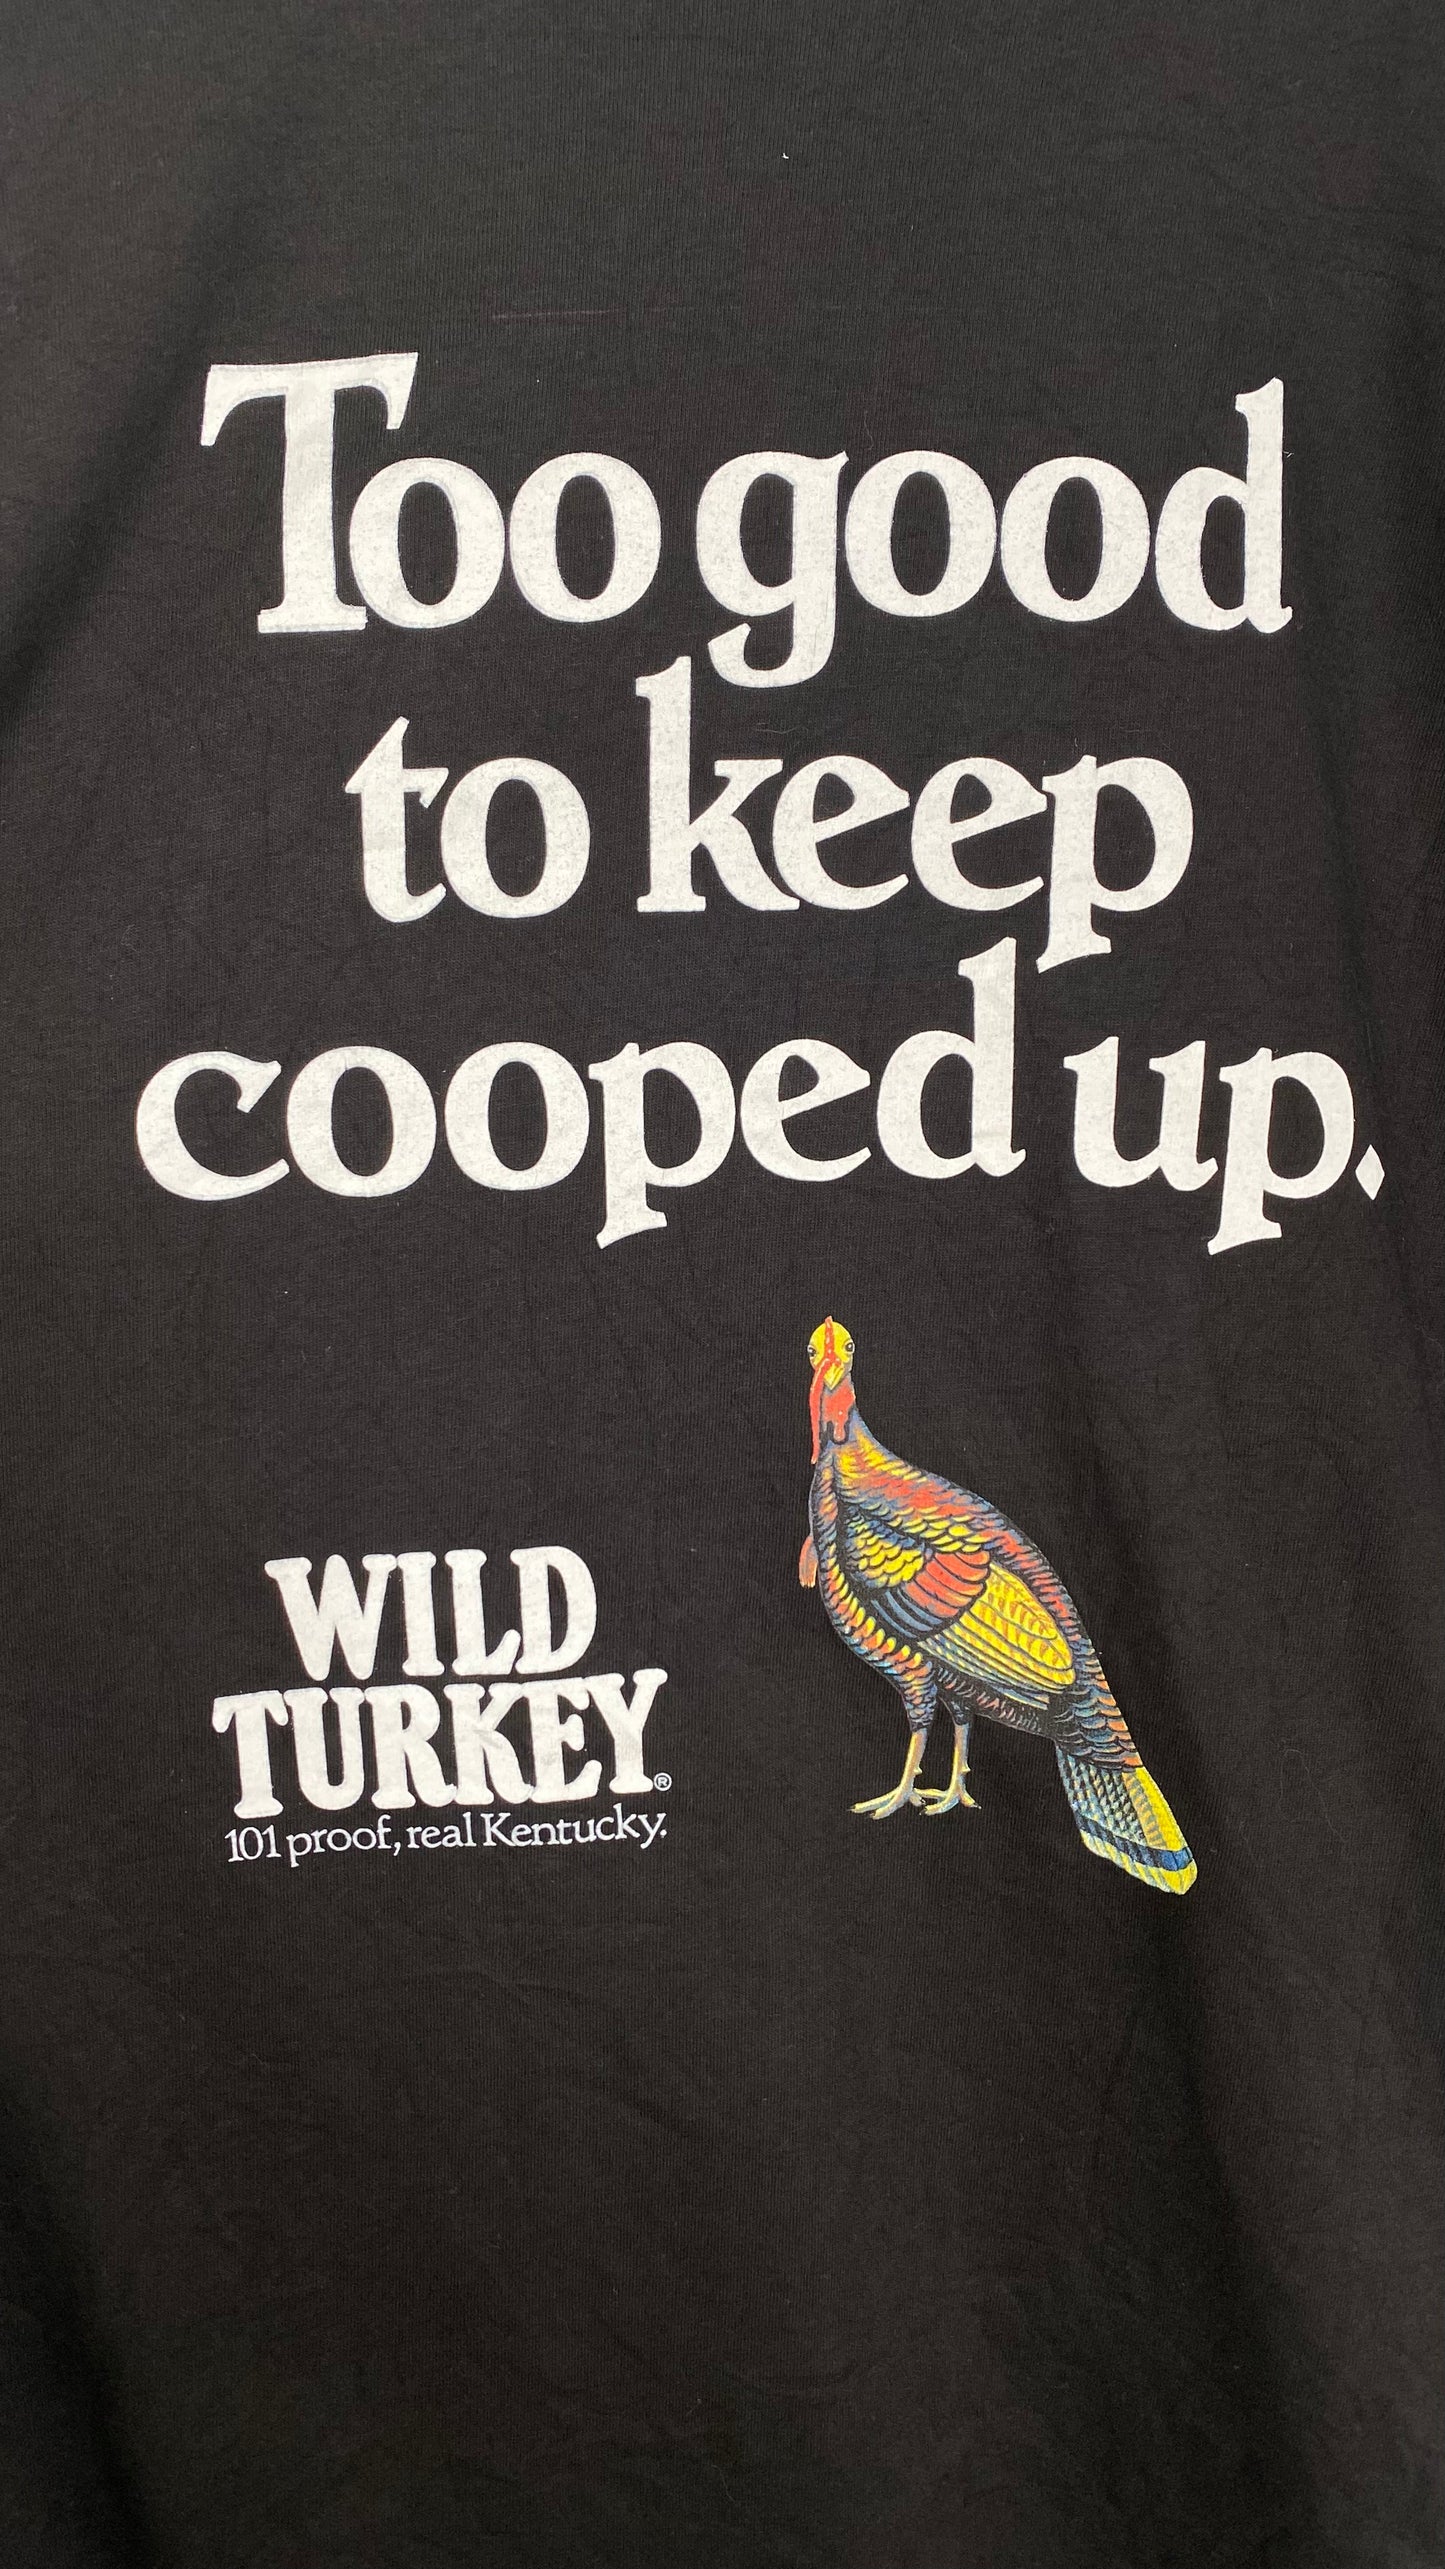 Too Good to Keep Cooped Up Wild Turkey 1990's Vintage T-Shirt